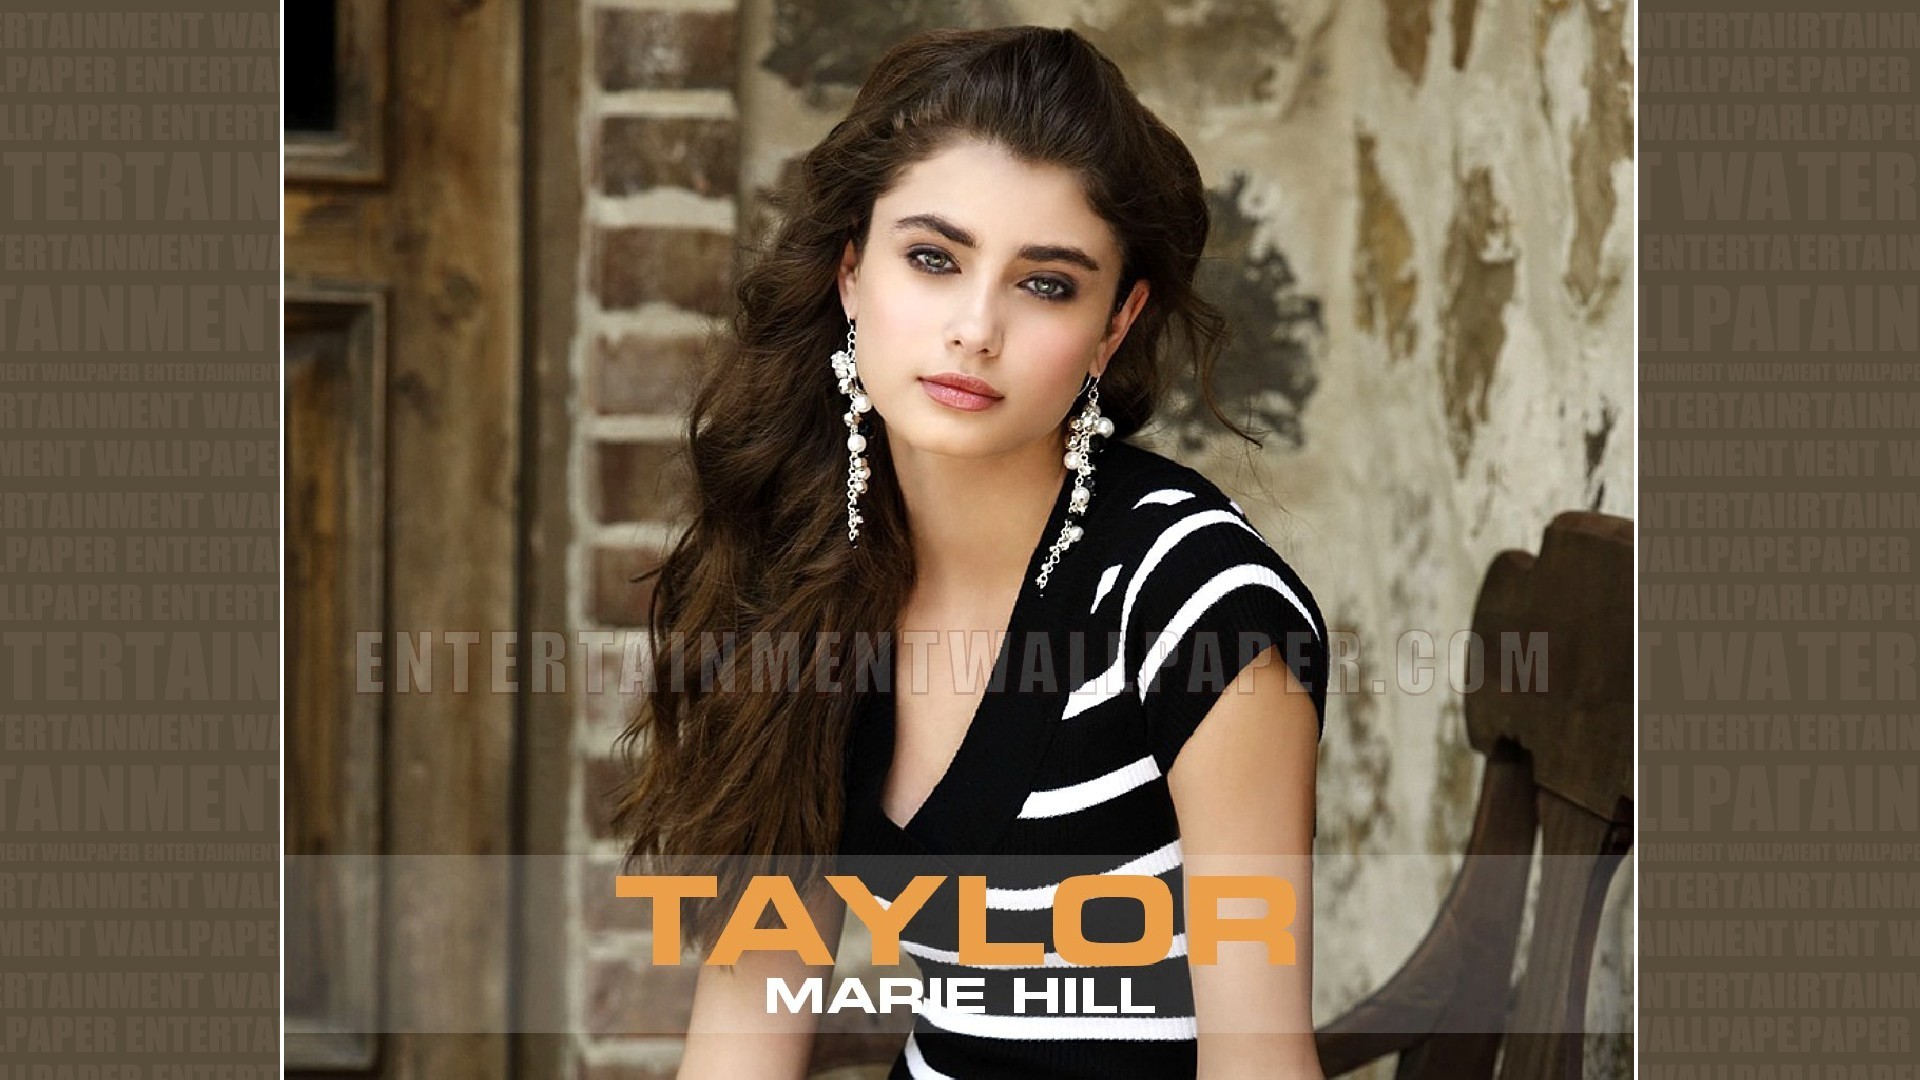 1920x1080 Taylor Marie Hill Wallpaper - Original size, download now.